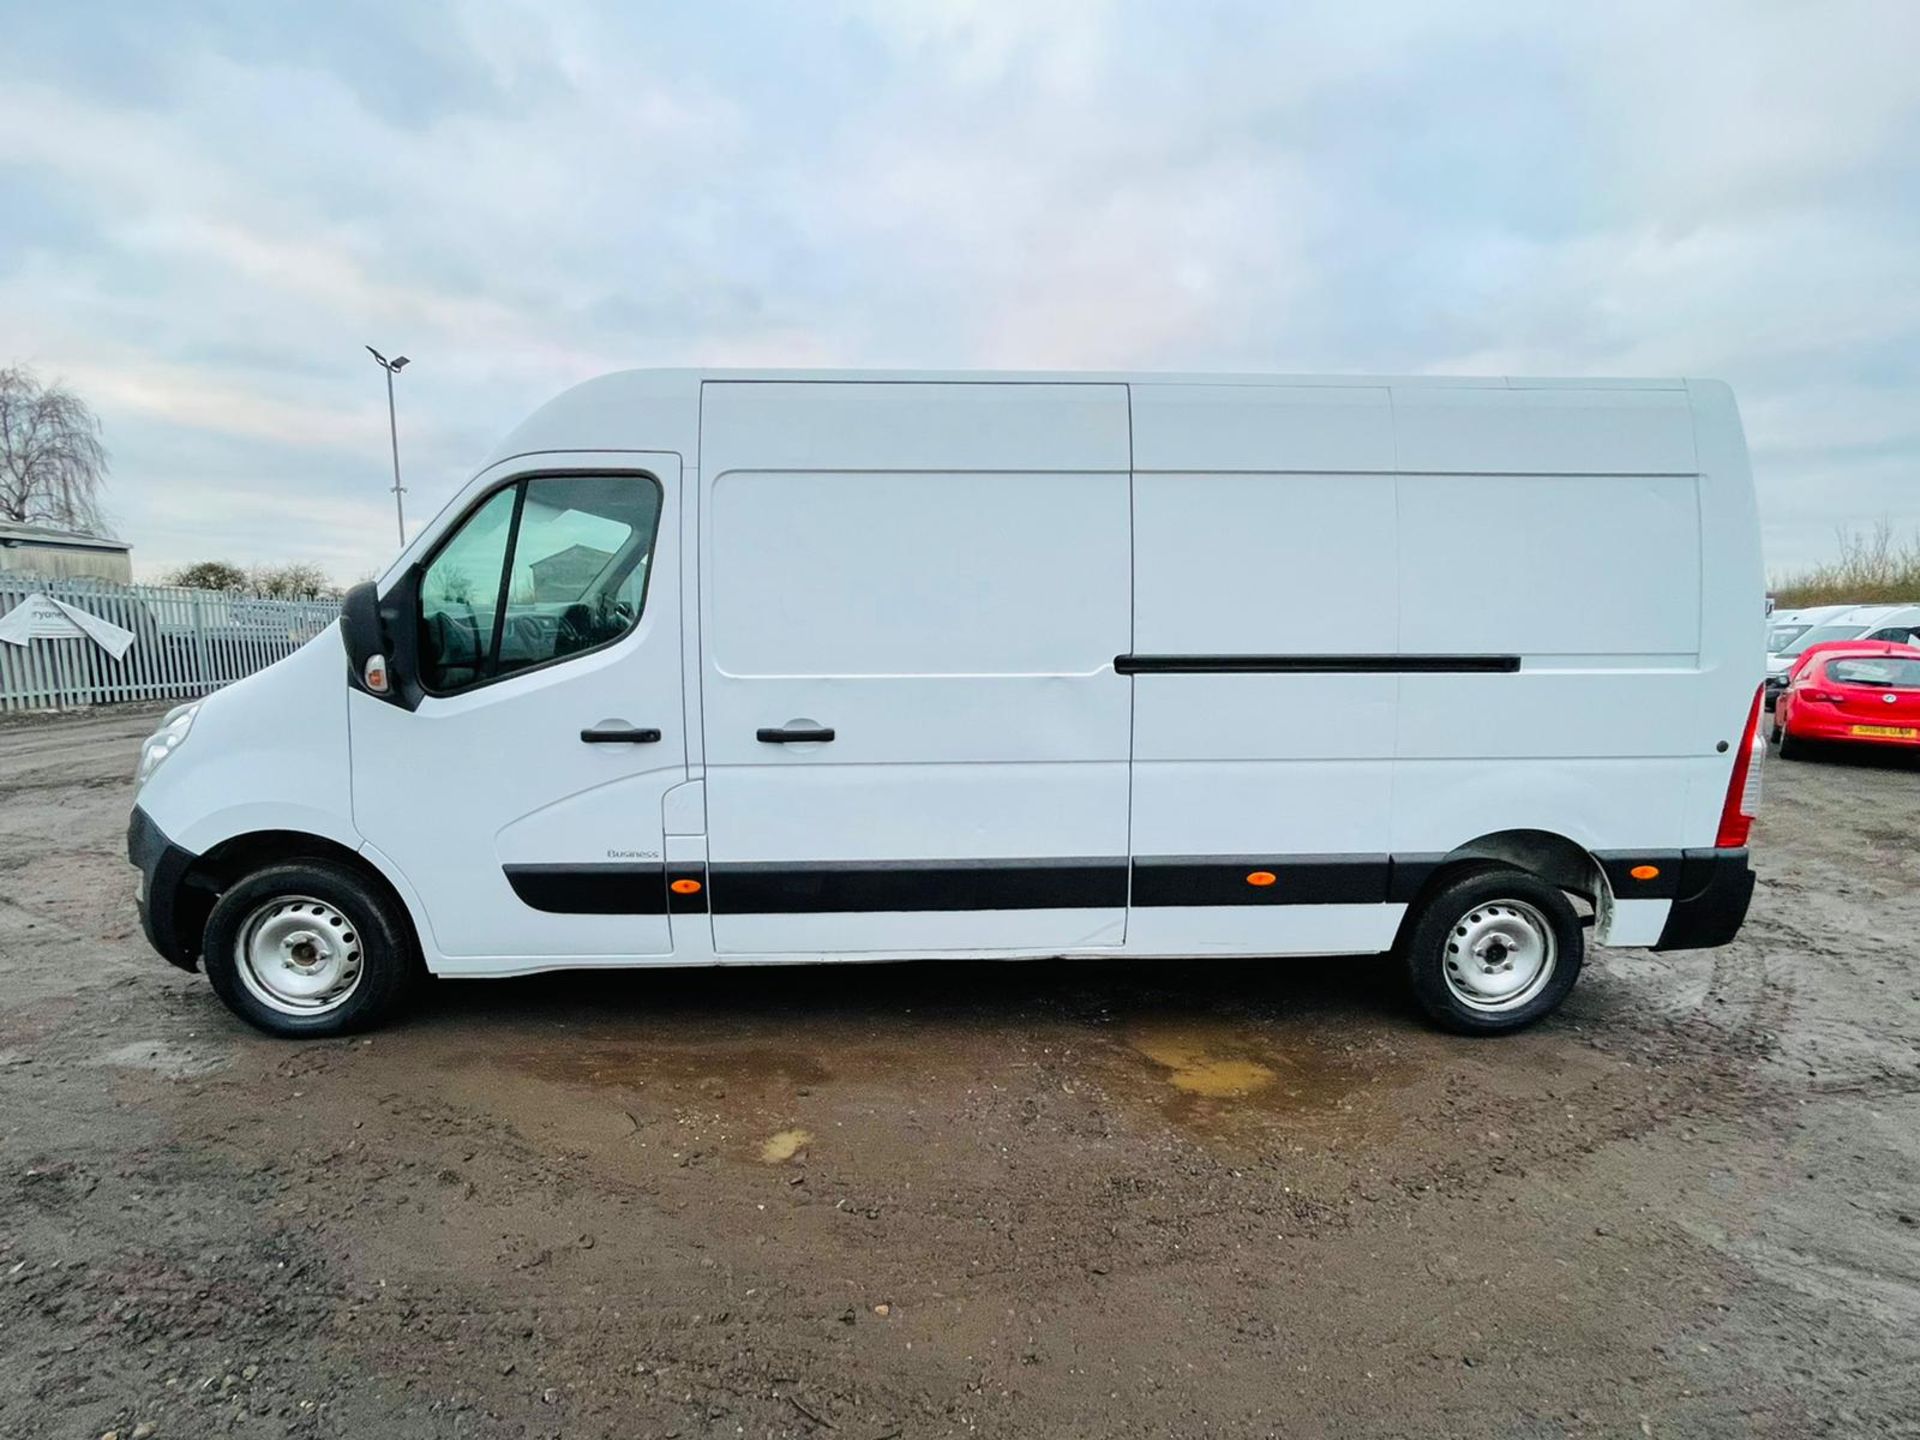 Renault Master 2.3 DCI 110 Business LM35 L3 H2 2016 '16 reg' Fridge/Freezer - Fully Insulated - Image 12 of 23